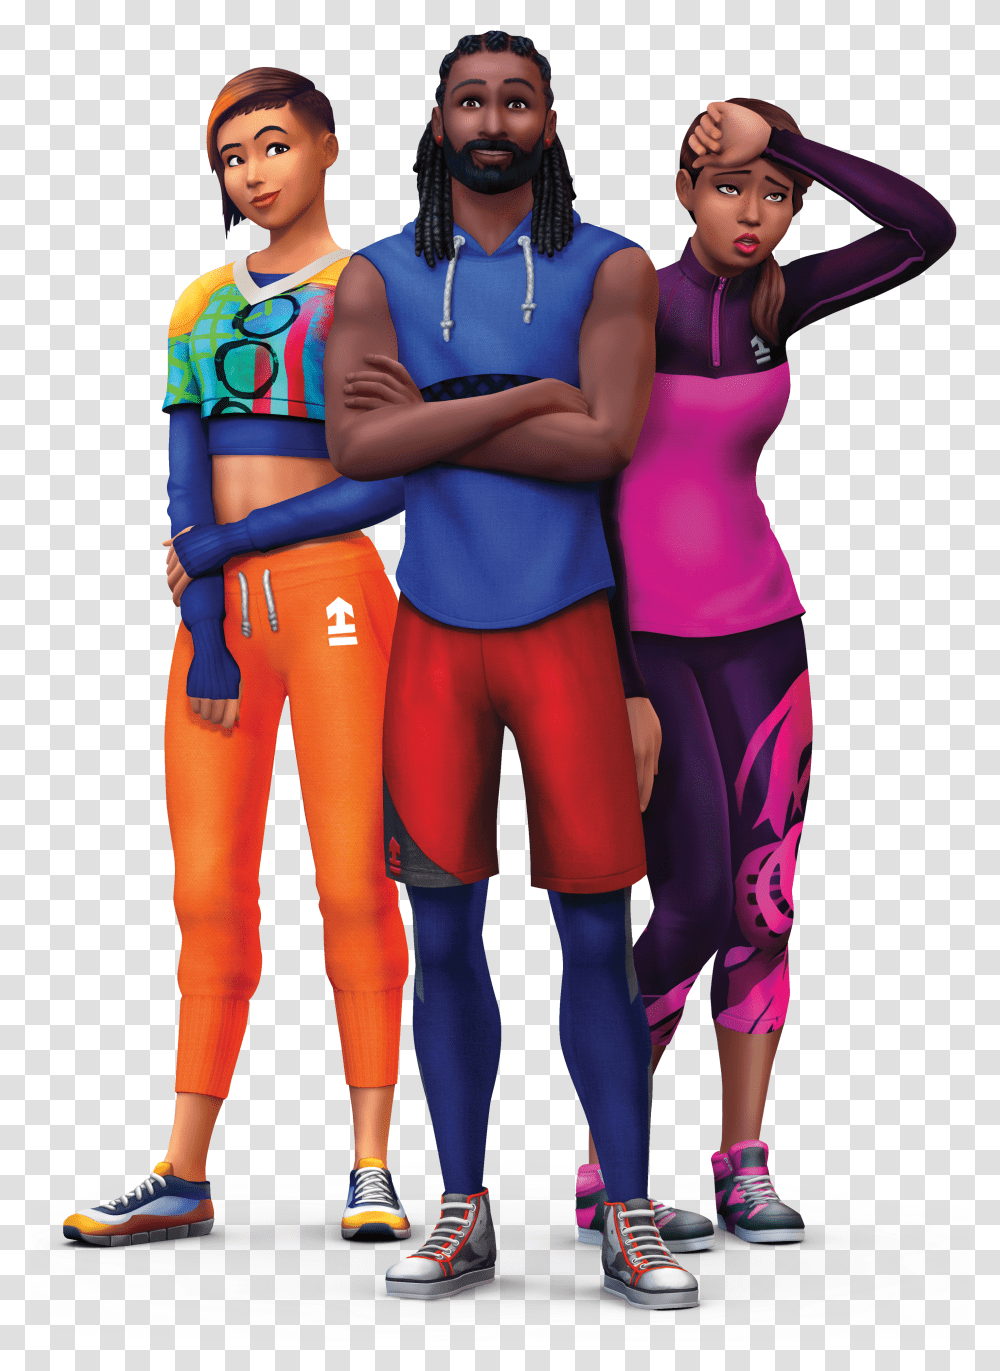 Official Sims 4 Fitness Stuff Assets Provided By Ea Sims 4 Fitness Stuff Transparent Png